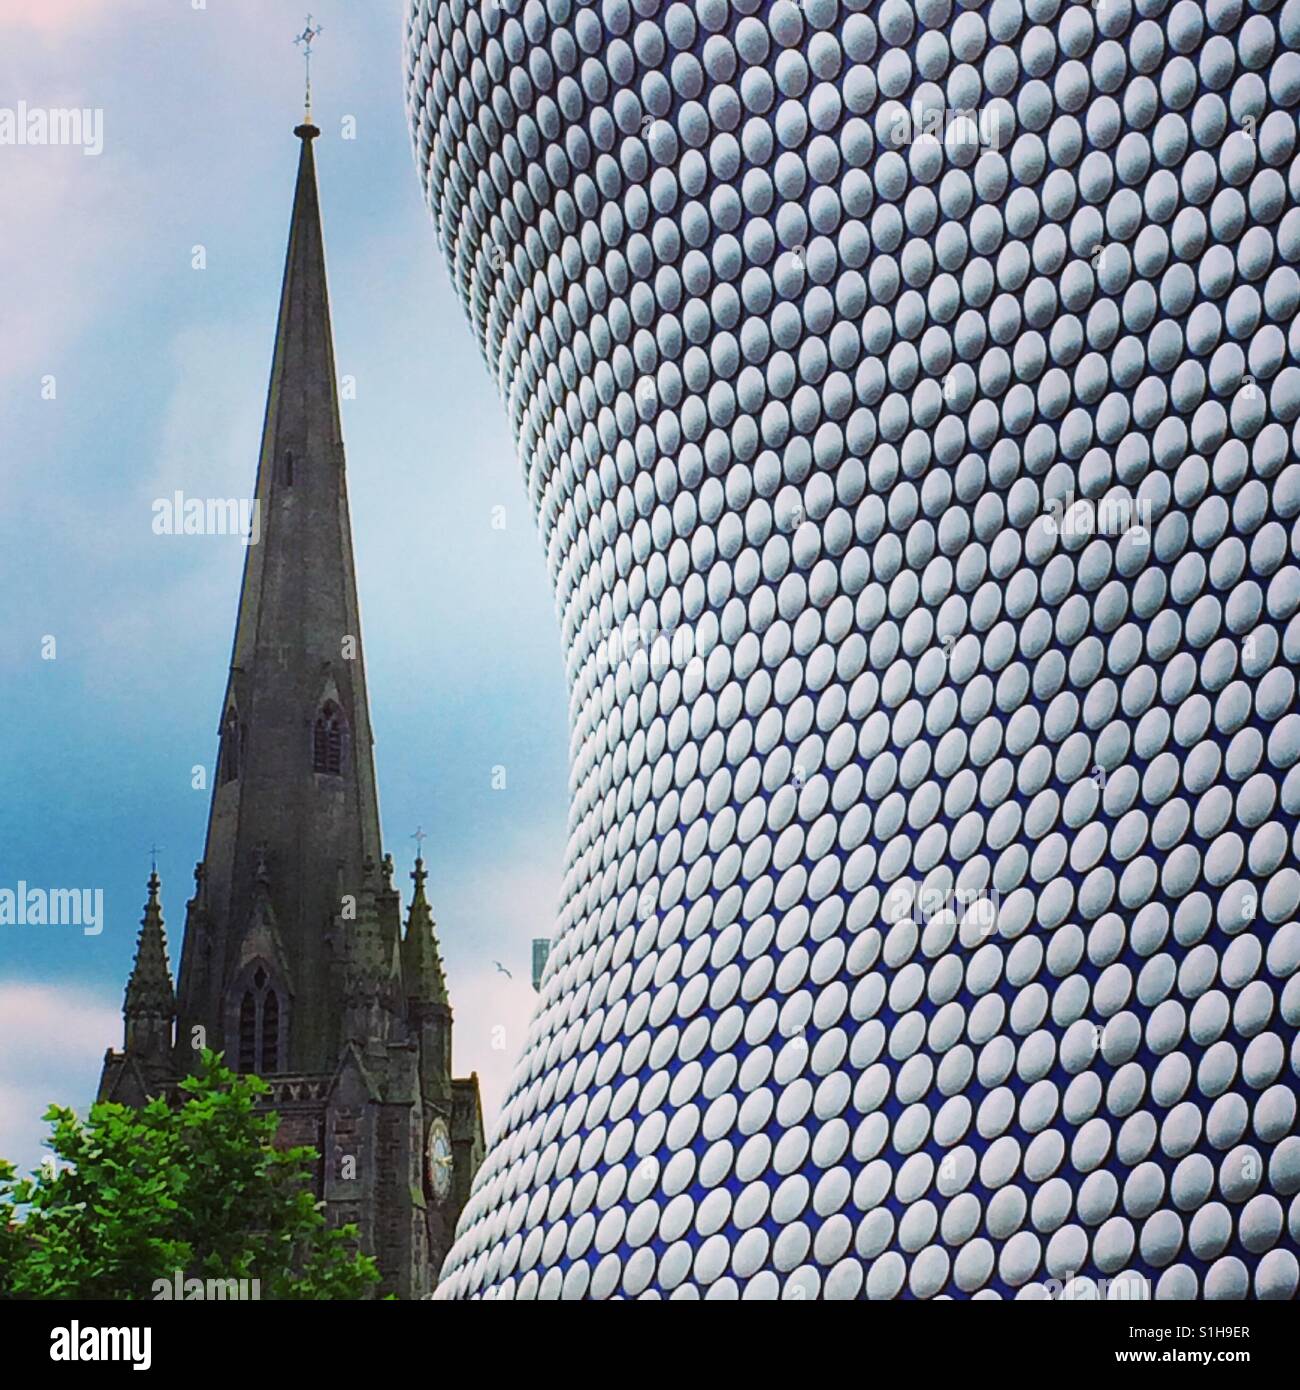 The modern design of the Selfridges building in Birmingham, UK contrasts against the spire of an adjacent church Stock Photo